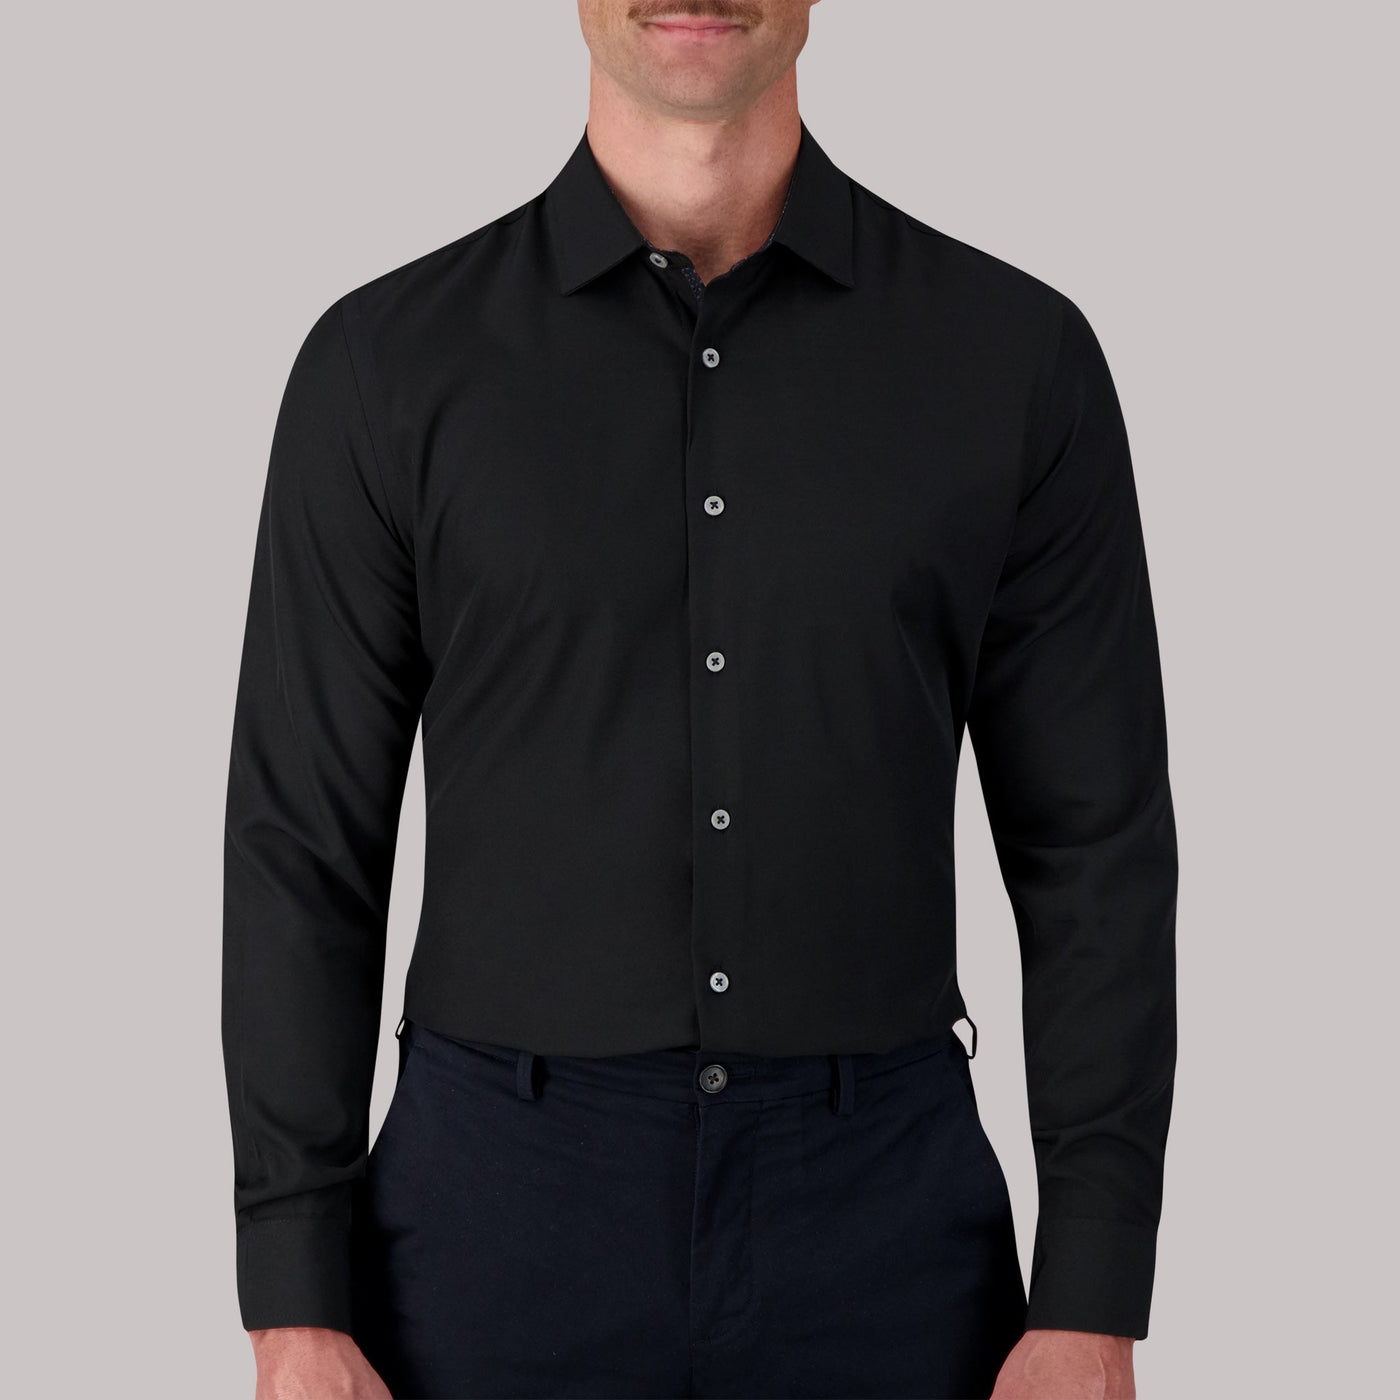 4-Way Stretch Dress Shirt in Report Collection – 3-Pack Black